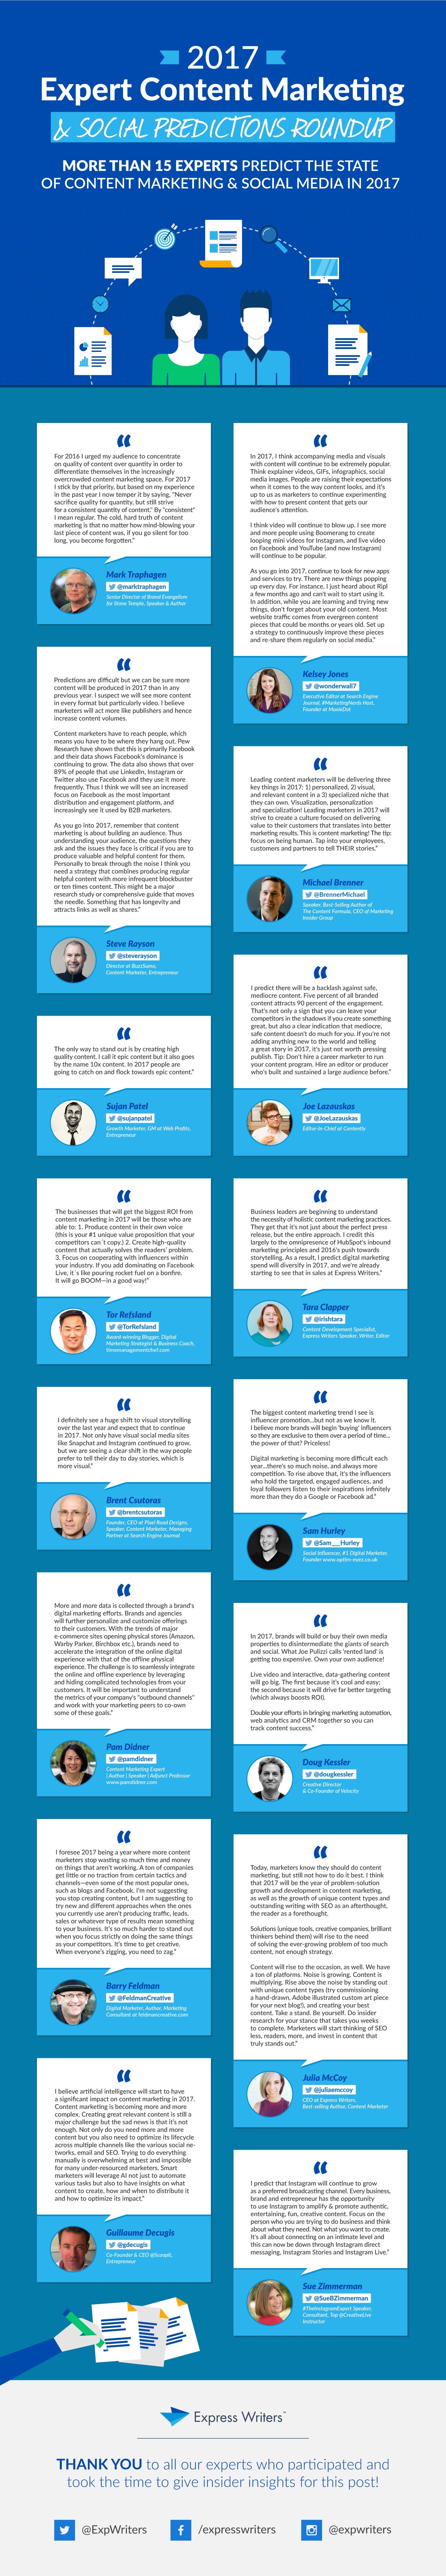 2017 Expert Content Marketing and Social Predictions Roundup #infographic